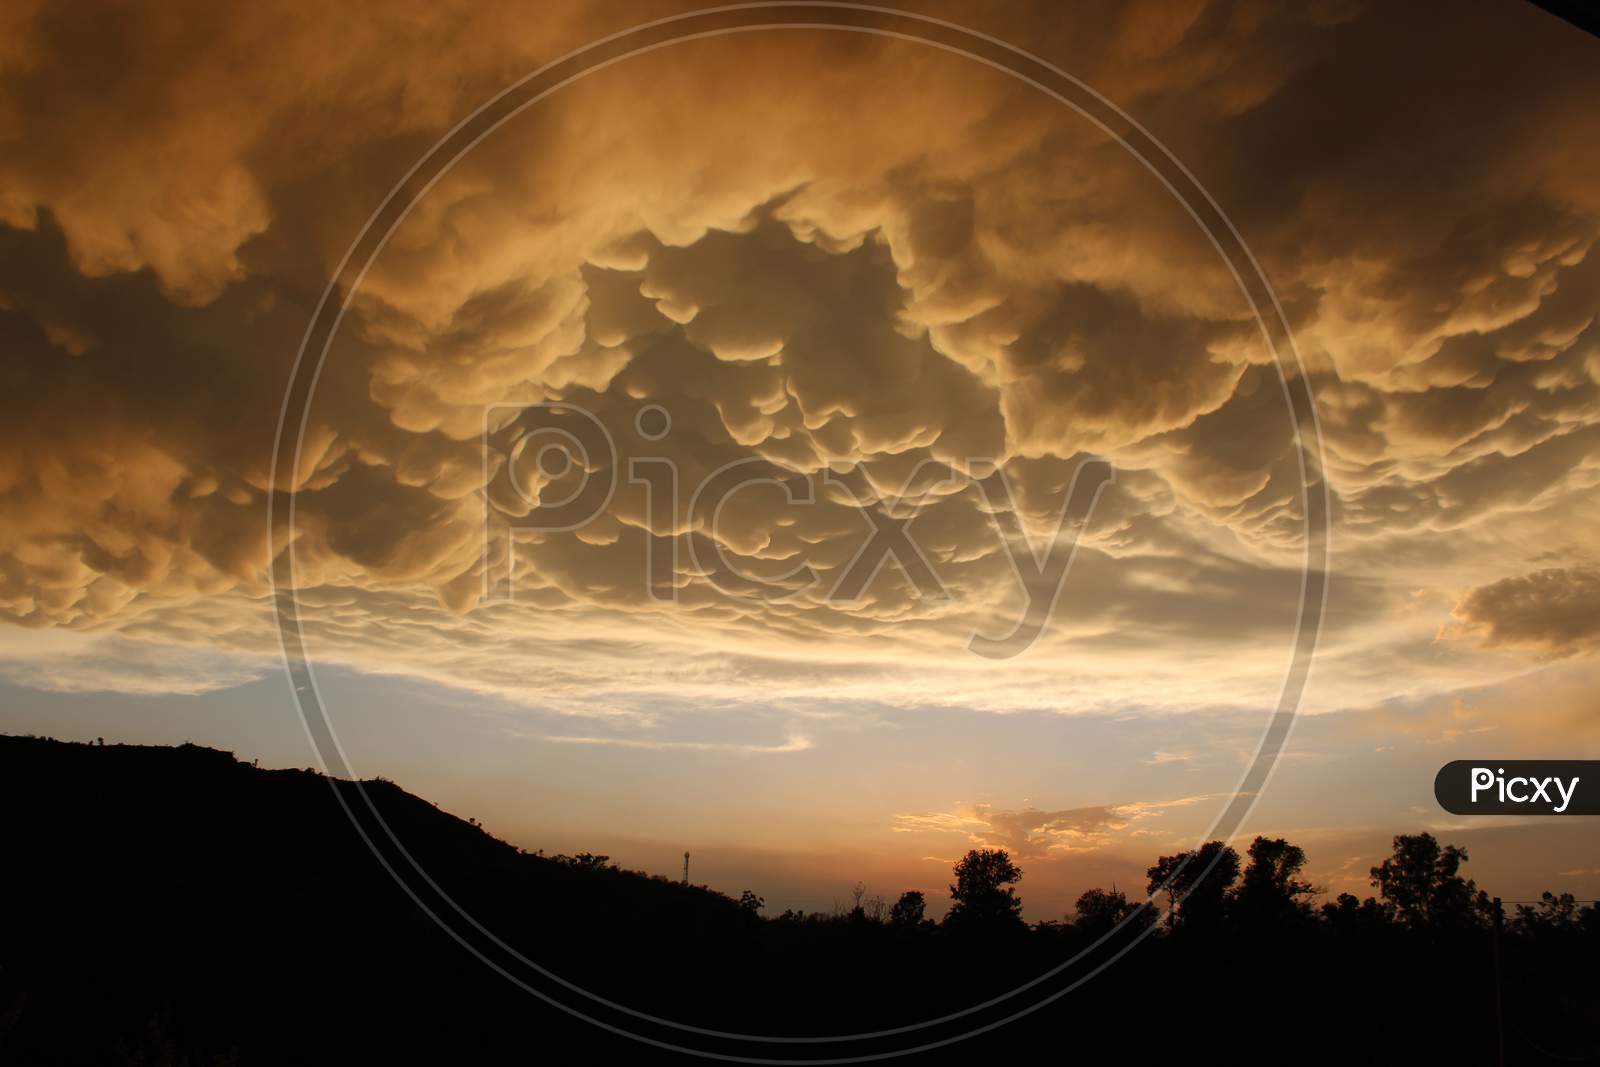 Silhouette of Trees Over a Sunset Sky With Dark Clouds in Background